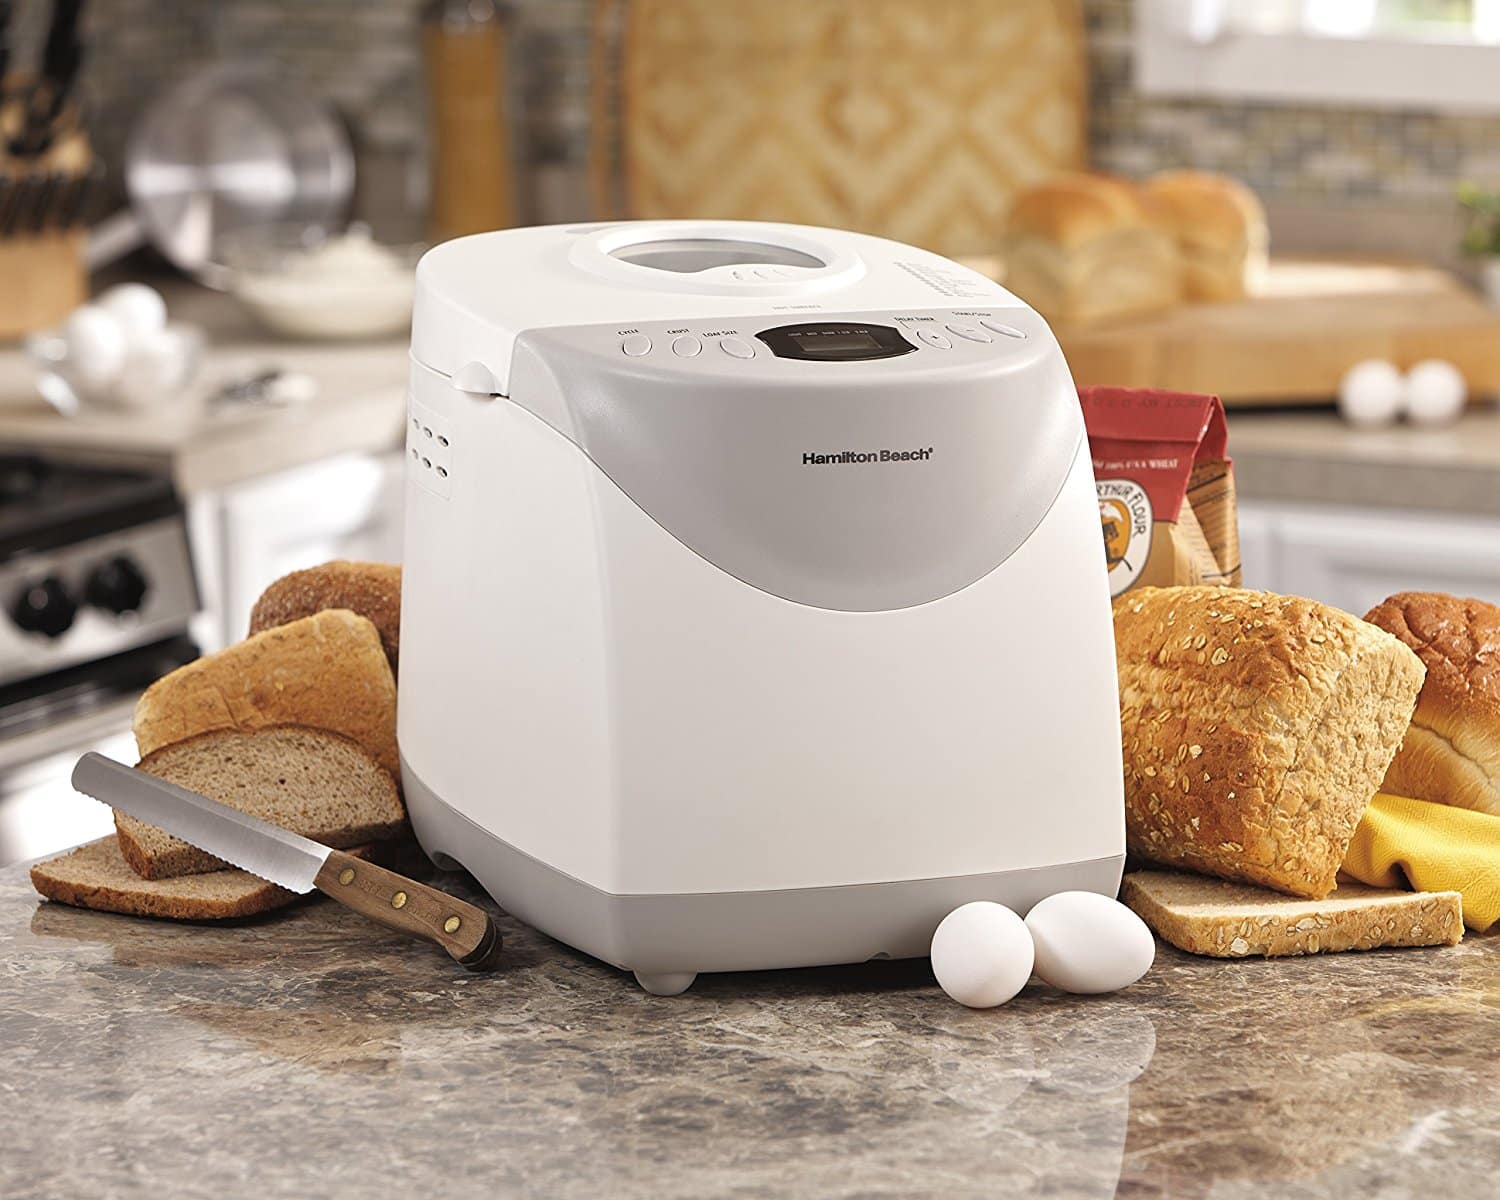 Top 10 Best Bread Makers in 2022 - Top Best Product Reviews